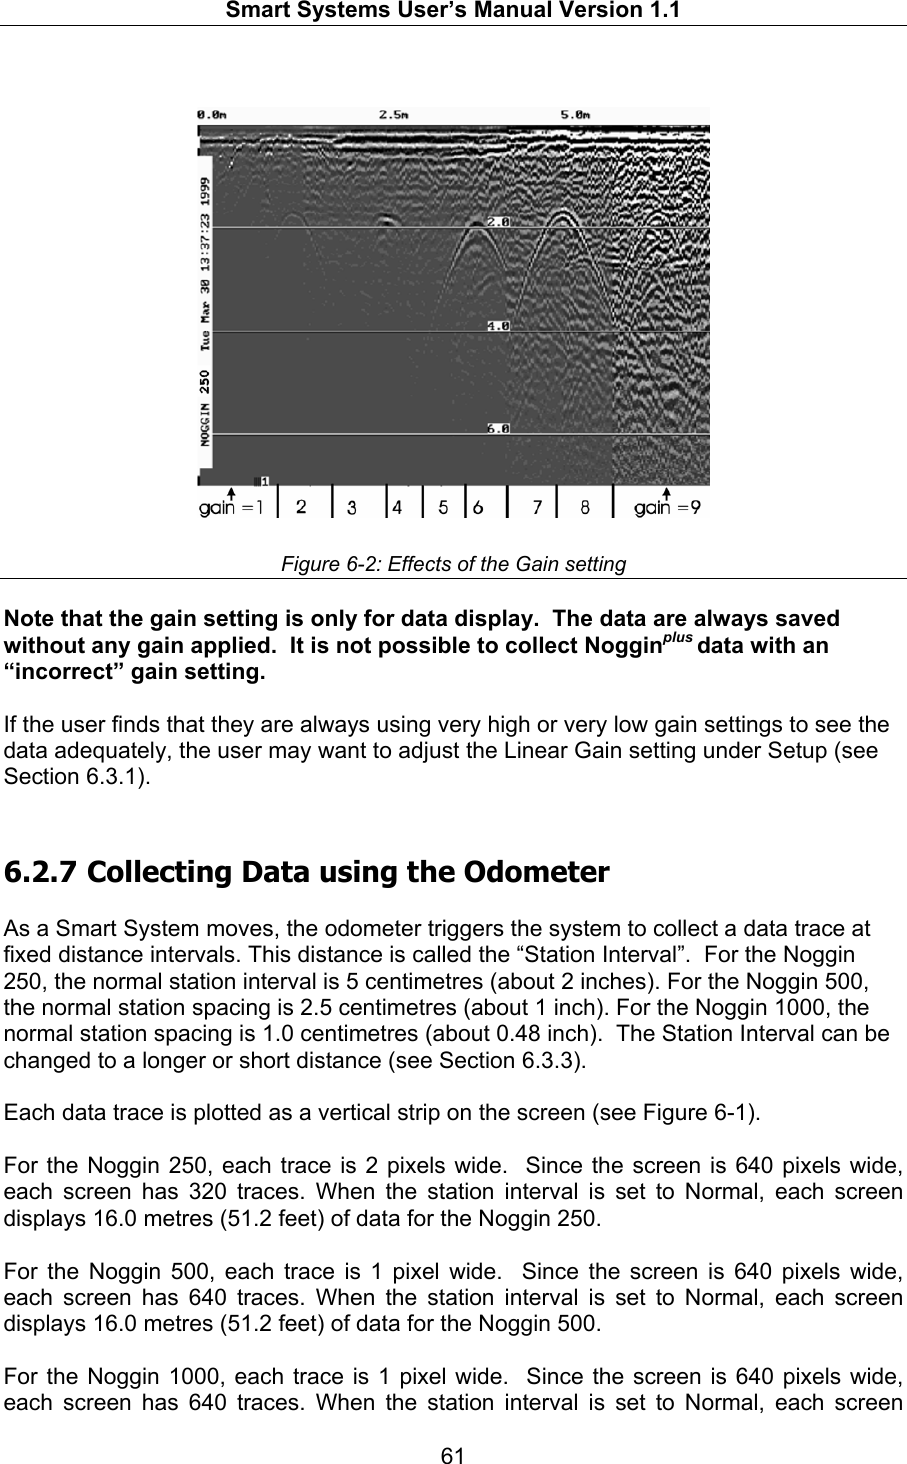   Smart Systems User’s Manual Version 1.1  61    Figure 6-2: Effects of the Gain setting  Note that the gain setting is only for data display.  The data are always saved without any gain applied.  It is not possible to collect Nogginplus data with an “incorrect” gain setting.   If the user finds that they are always using very high or very low gain settings to see the data adequately, the user may want to adjust the Linear Gain setting under Setup (see Section 6.3.1).  6.2.7  Collecting Data using the Odometer  As a Smart System moves, the odometer triggers the system to collect a data trace at fixed distance intervals. This distance is called the “Station Interval”.  For the Noggin 250, the normal station interval is 5 centimetres (about 2 inches). For the Noggin 500, the normal station spacing is 2.5 centimetres (about 1 inch). For the Noggin 1000, the normal station spacing is 1.0 centimetres (about 0.48 inch).  The Station Interval can be changed to a longer or short distance (see Section 6.3.3).  Each data trace is plotted as a vertical strip on the screen (see Figure 6-1).   For the Noggin 250, each trace is 2 pixels wide.  Since the screen is 640 pixels wide, each screen has 320 traces. When the station interval is set to Normal, each screen displays 16.0 metres (51.2 feet) of data for the Noggin 250.  For the Noggin 500, each trace is 1 pixel wide.  Since the screen is 640 pixels wide, each screen has 640 traces. When the station interval is set to Normal, each screen displays 16.0 metres (51.2 feet) of data for the Noggin 500.  For the Noggin 1000, each trace is 1 pixel wide.  Since the screen is 640 pixels wide, each screen has 640 traces. When the station interval is set to Normal, each screen 